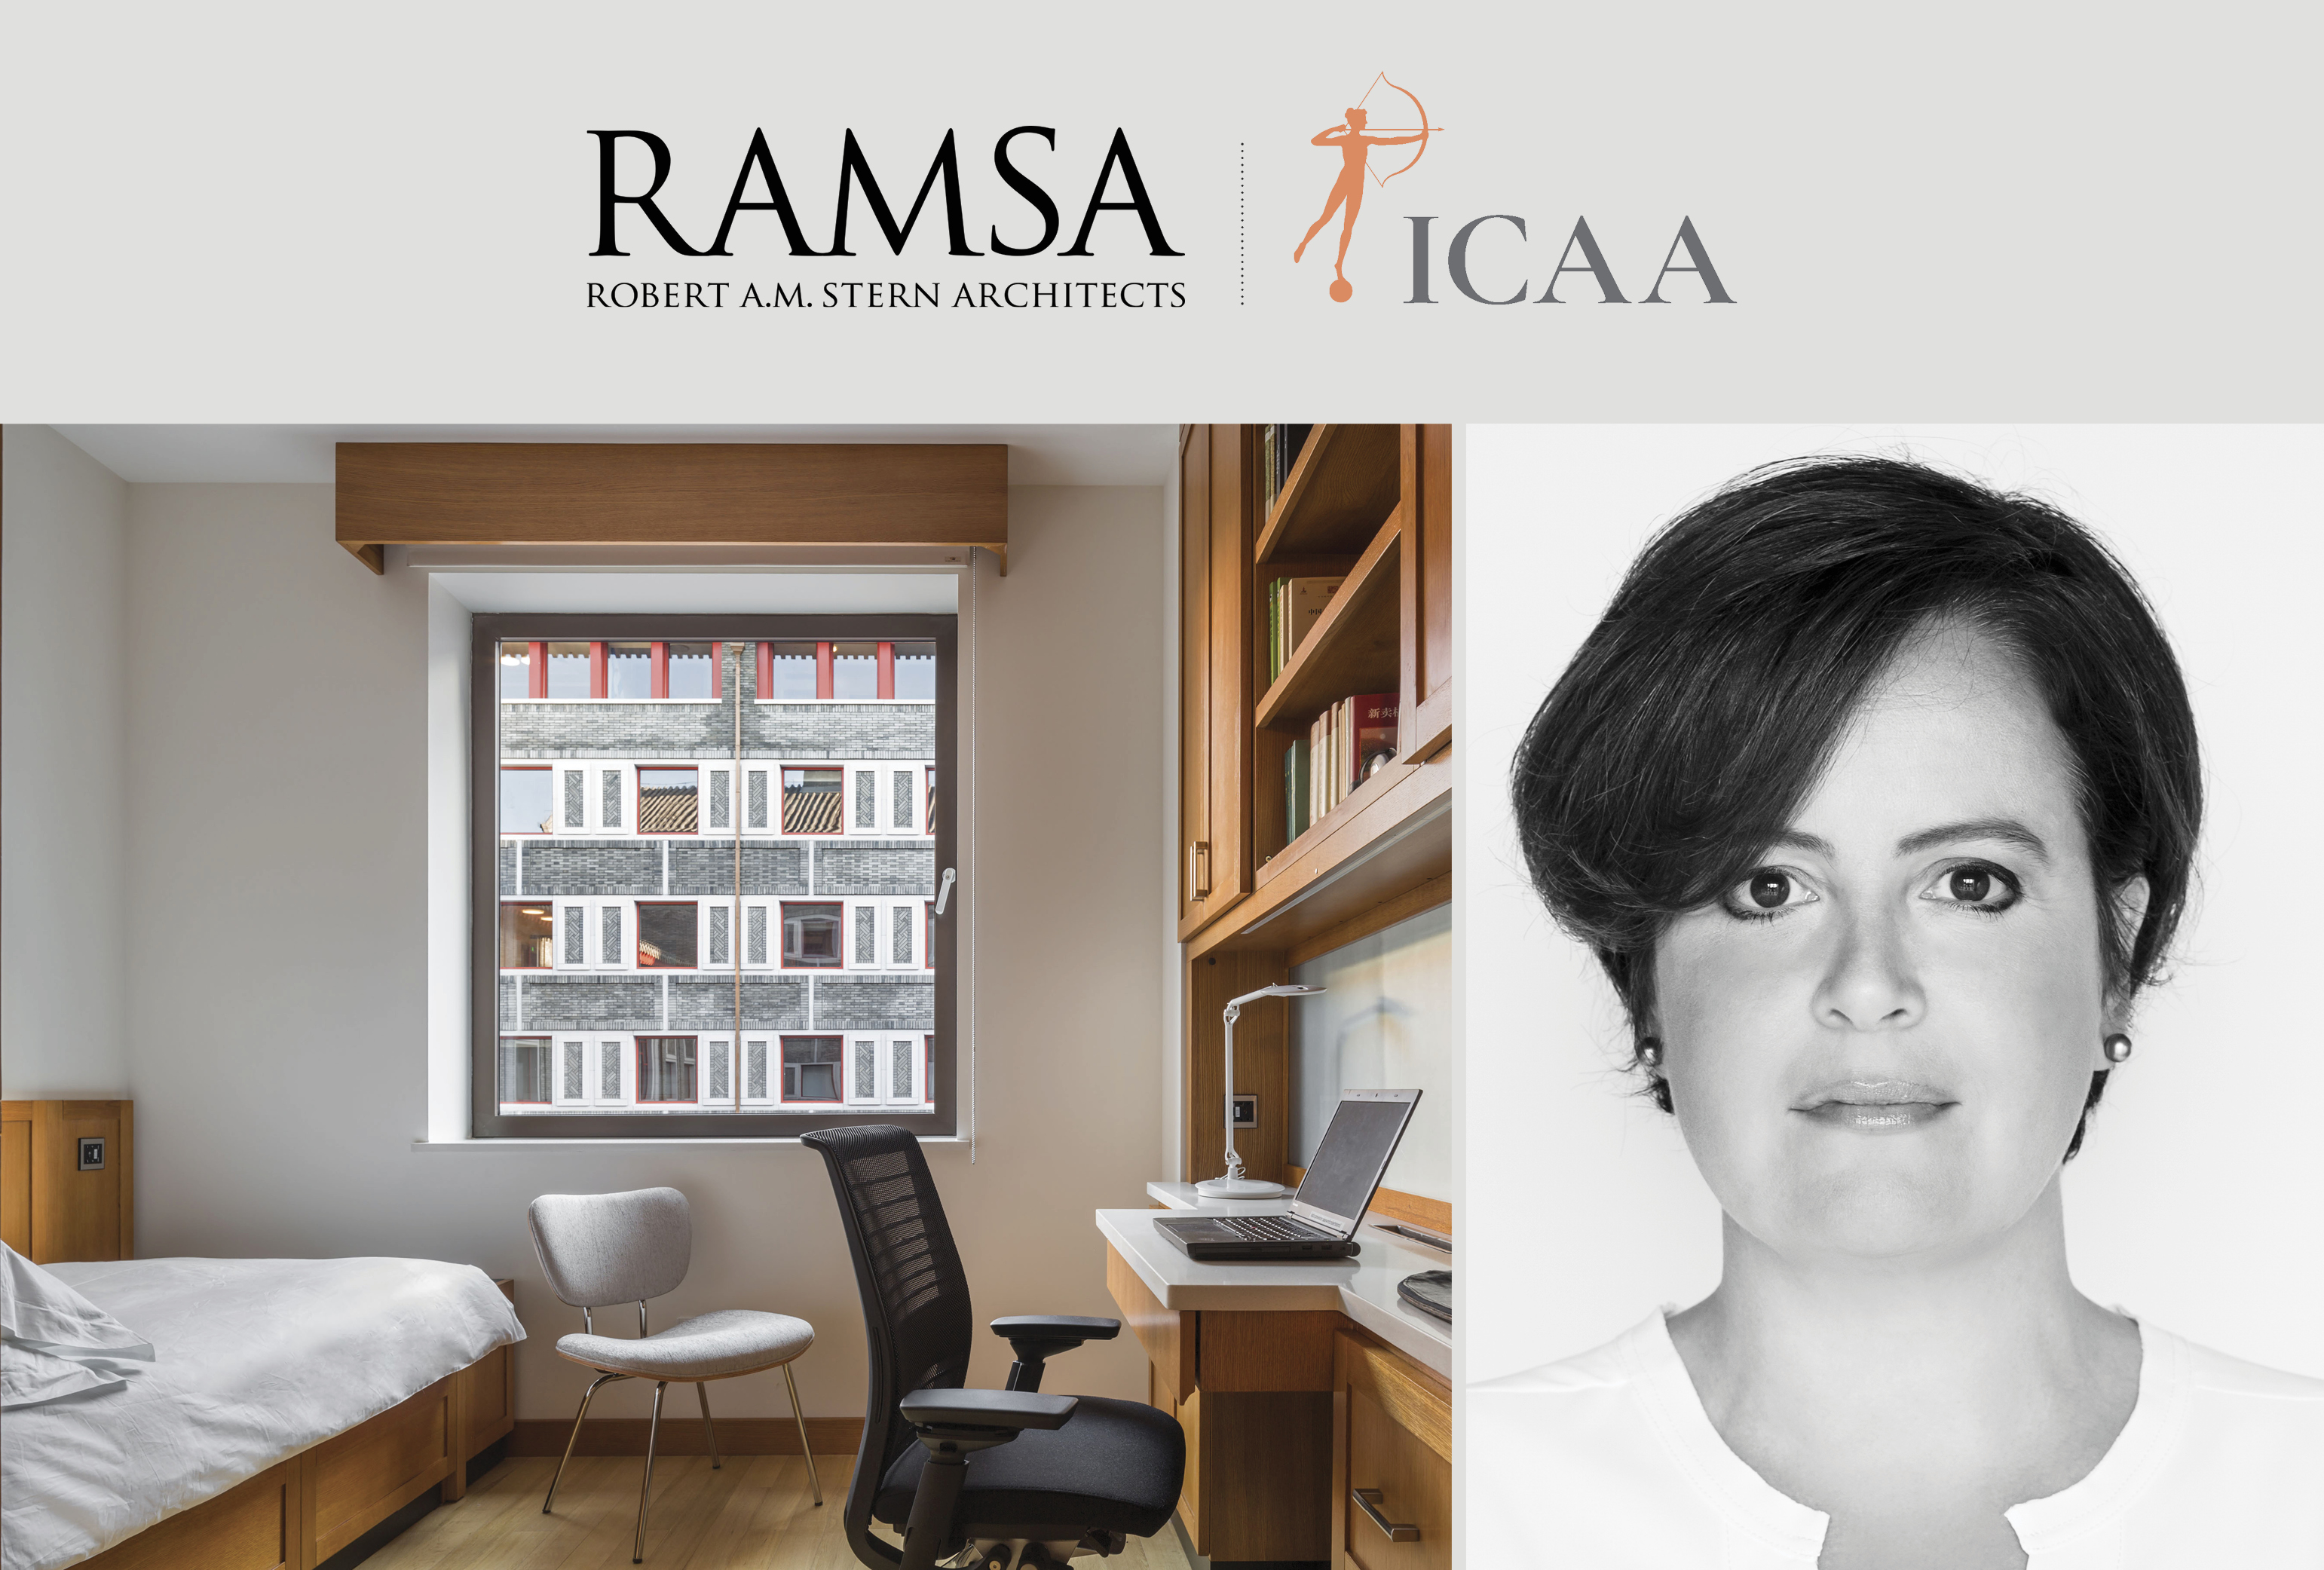 Melissa DelVecchio to Lead ICAA Forum “Living on Campus: Student Housing Models”